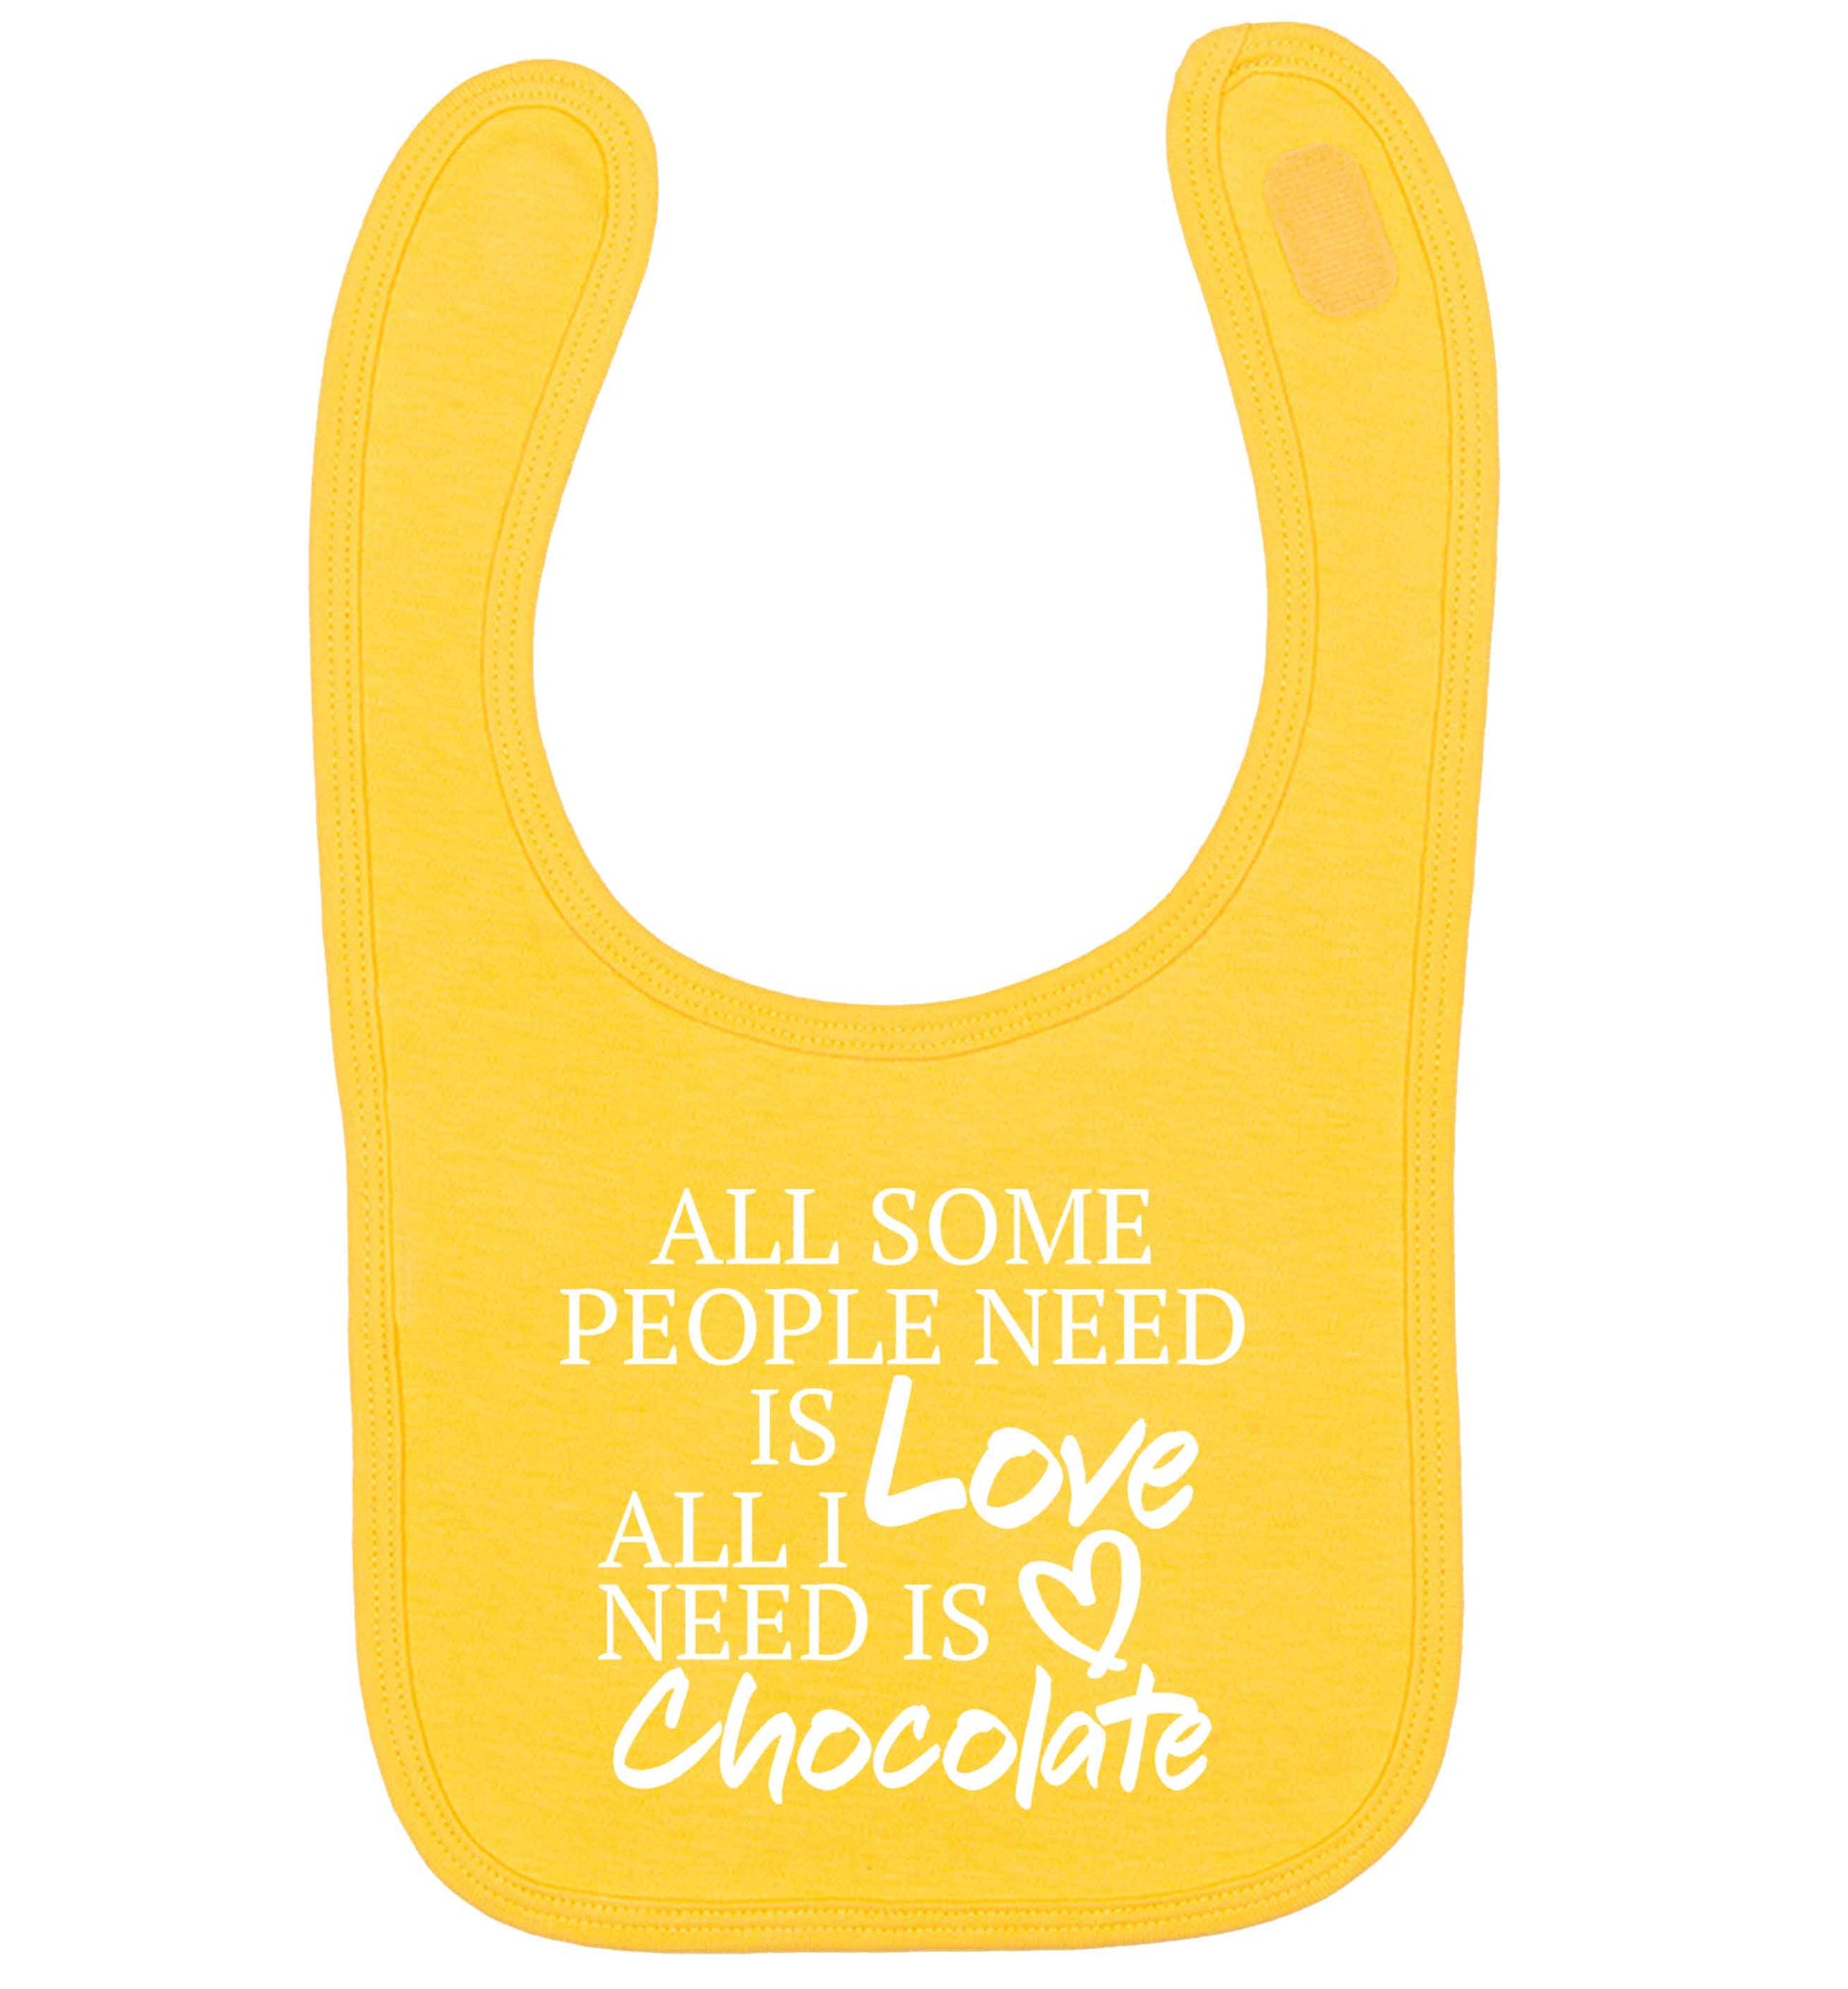 All some people need is love all I need is chocolate yellow baby bib